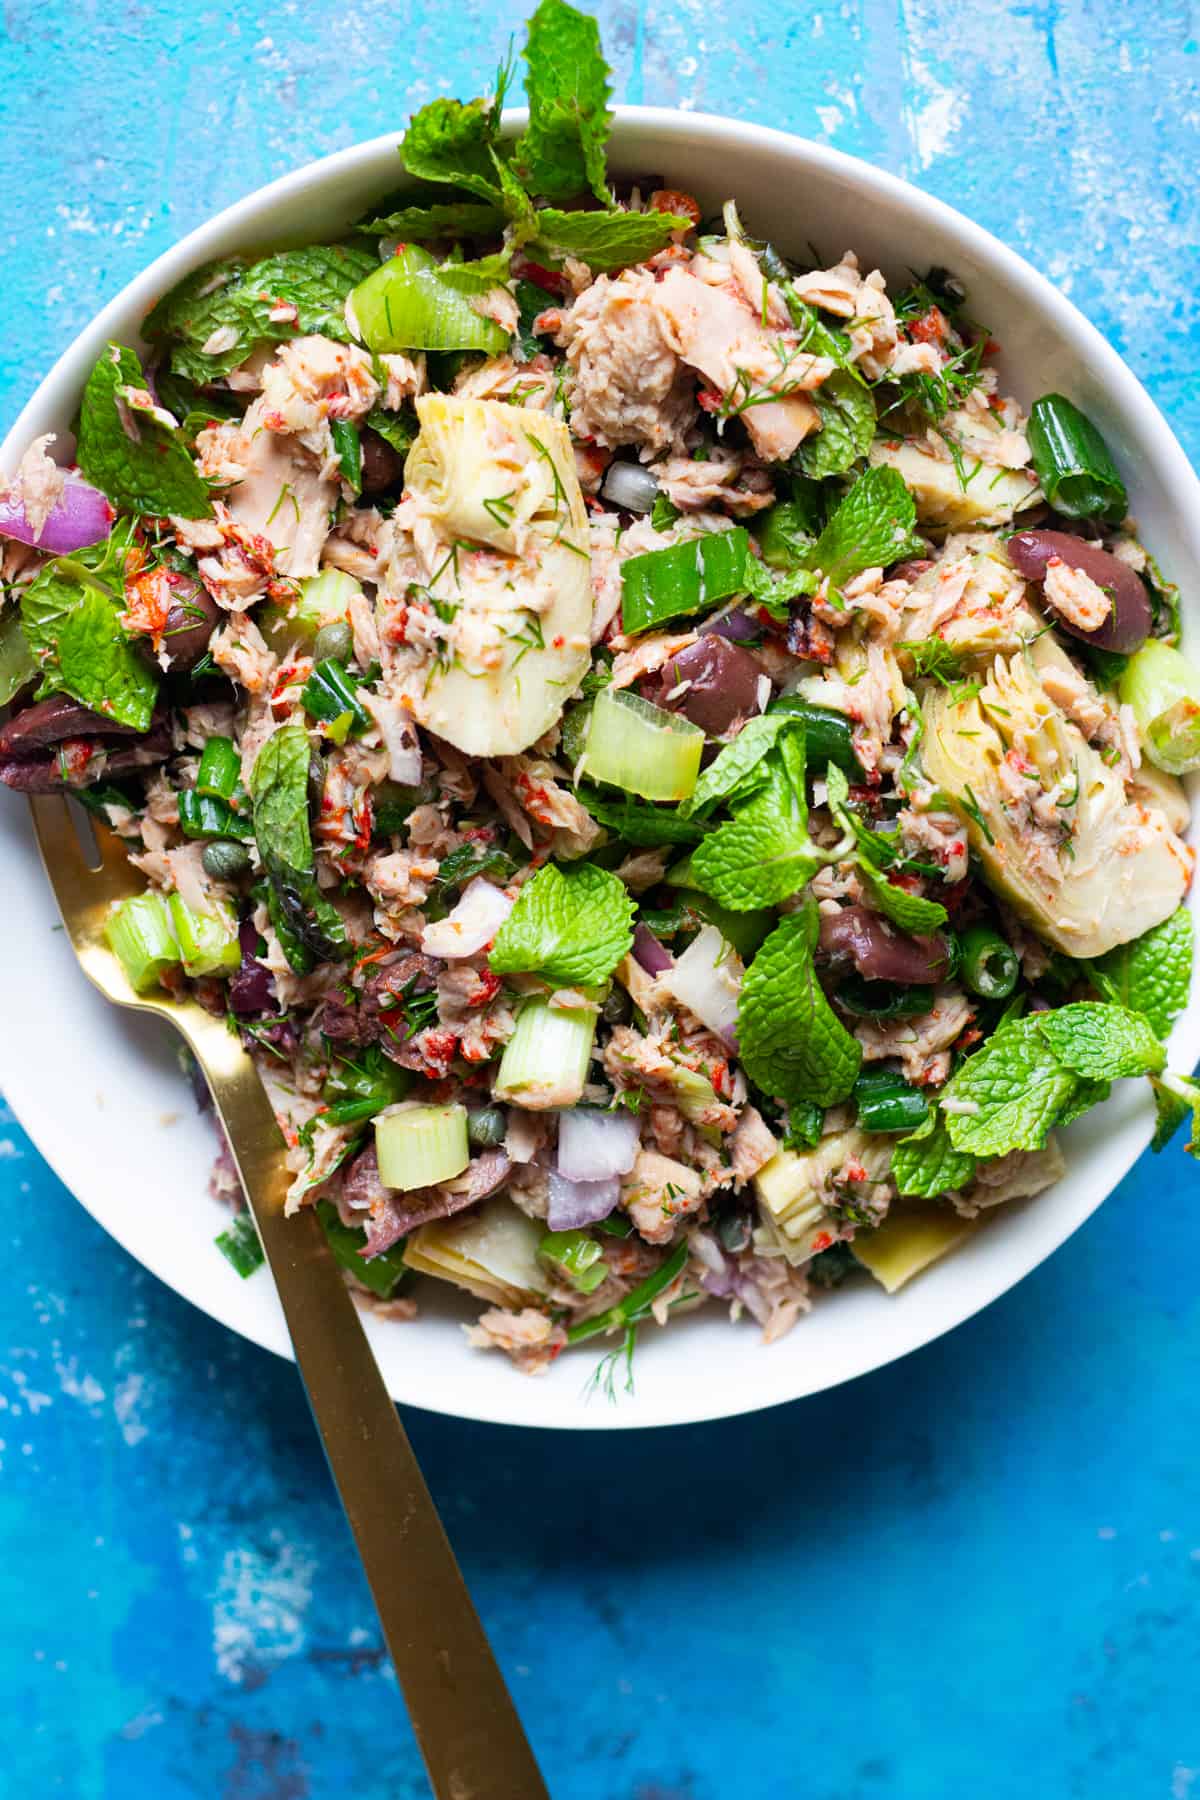 Ditch the mayonnaise and try this Mediterranean tuna salad. This no mayo tuna salad is packed with delicious ingredients like artichokes and herbs. 
